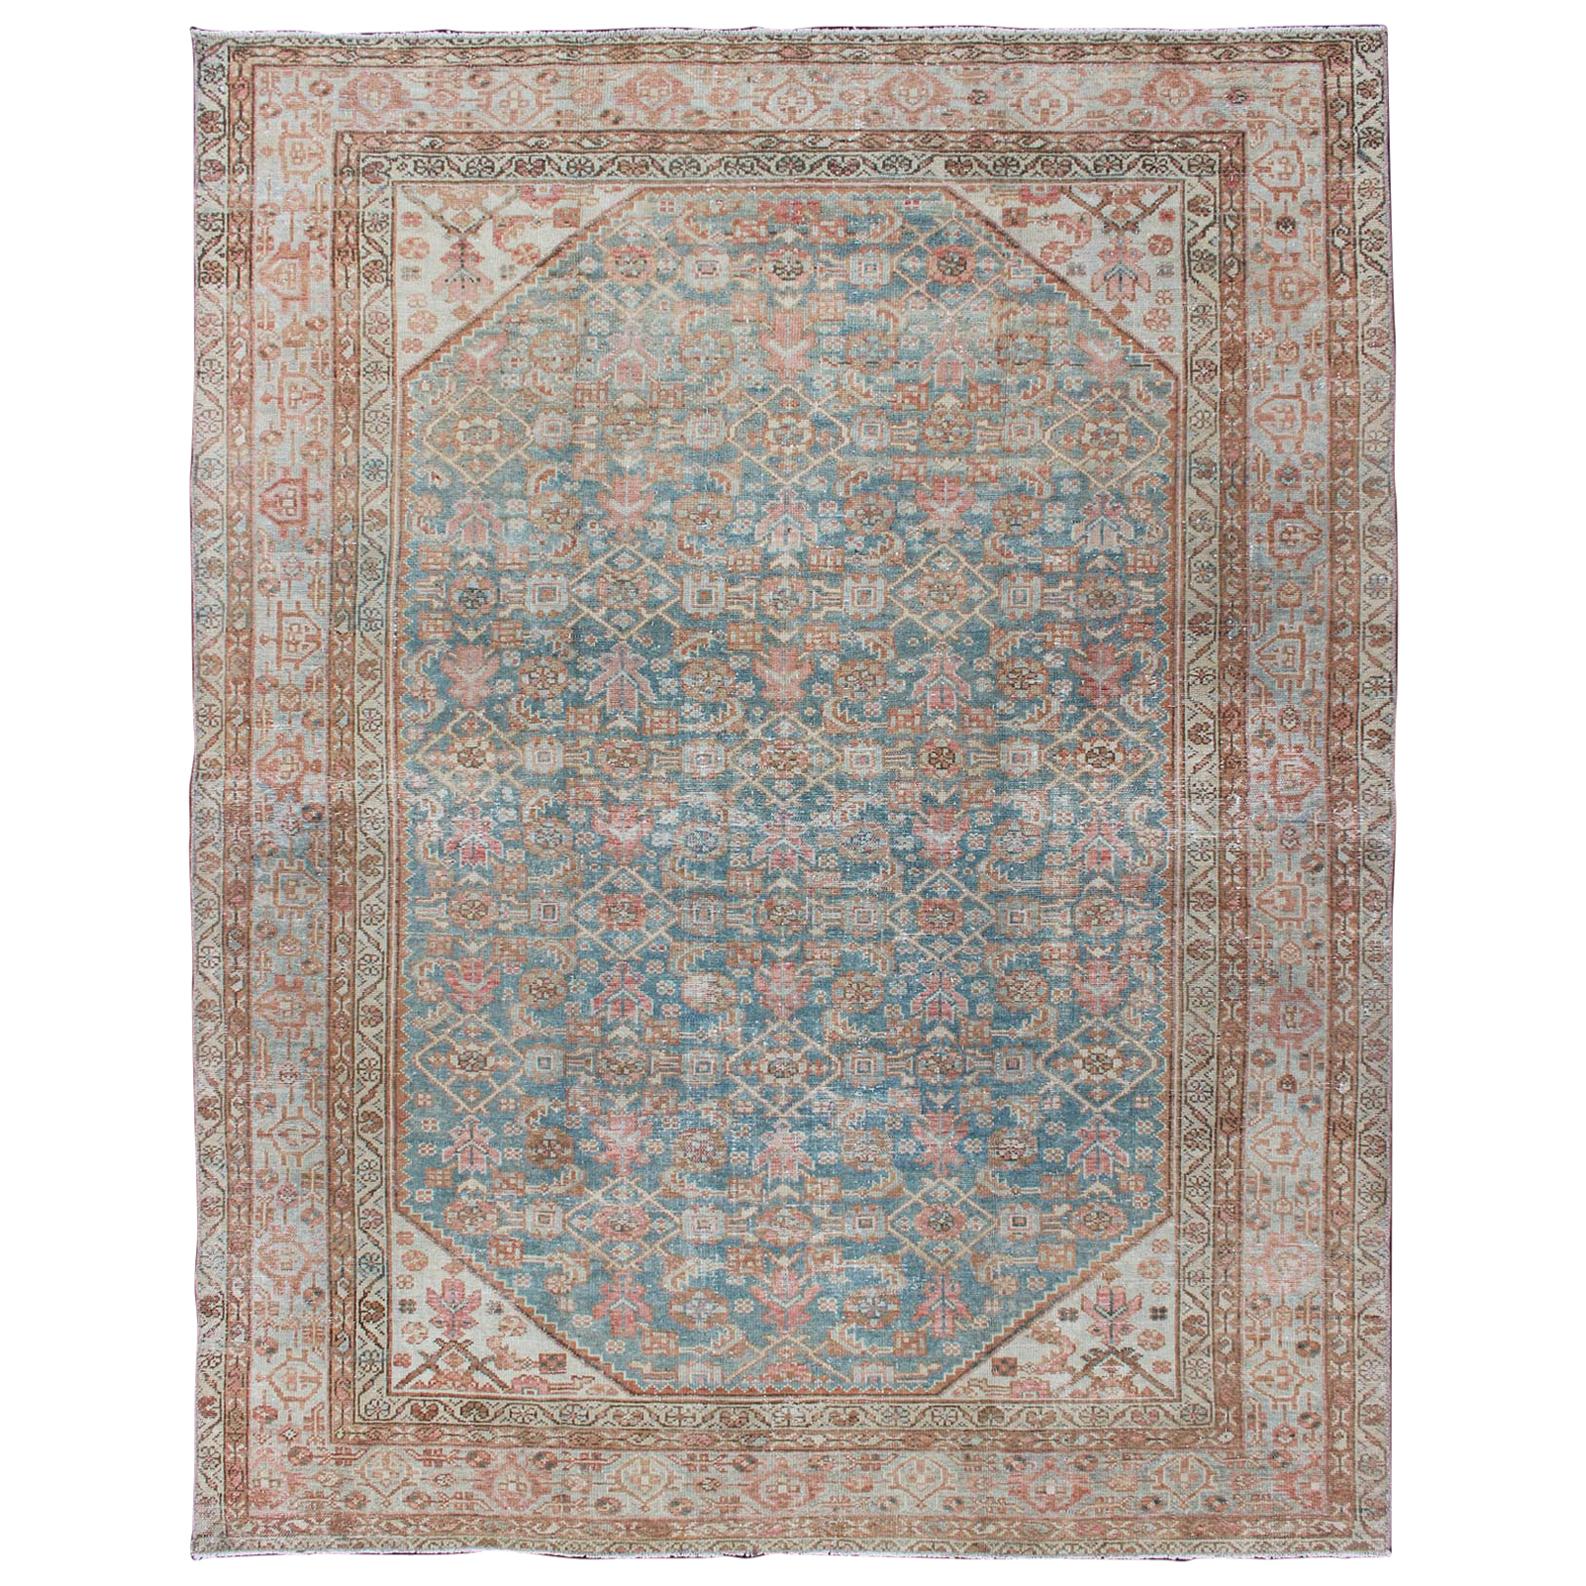 Antique Malayer Carpet with All-Over Design in Blue Gray Tones For Sale